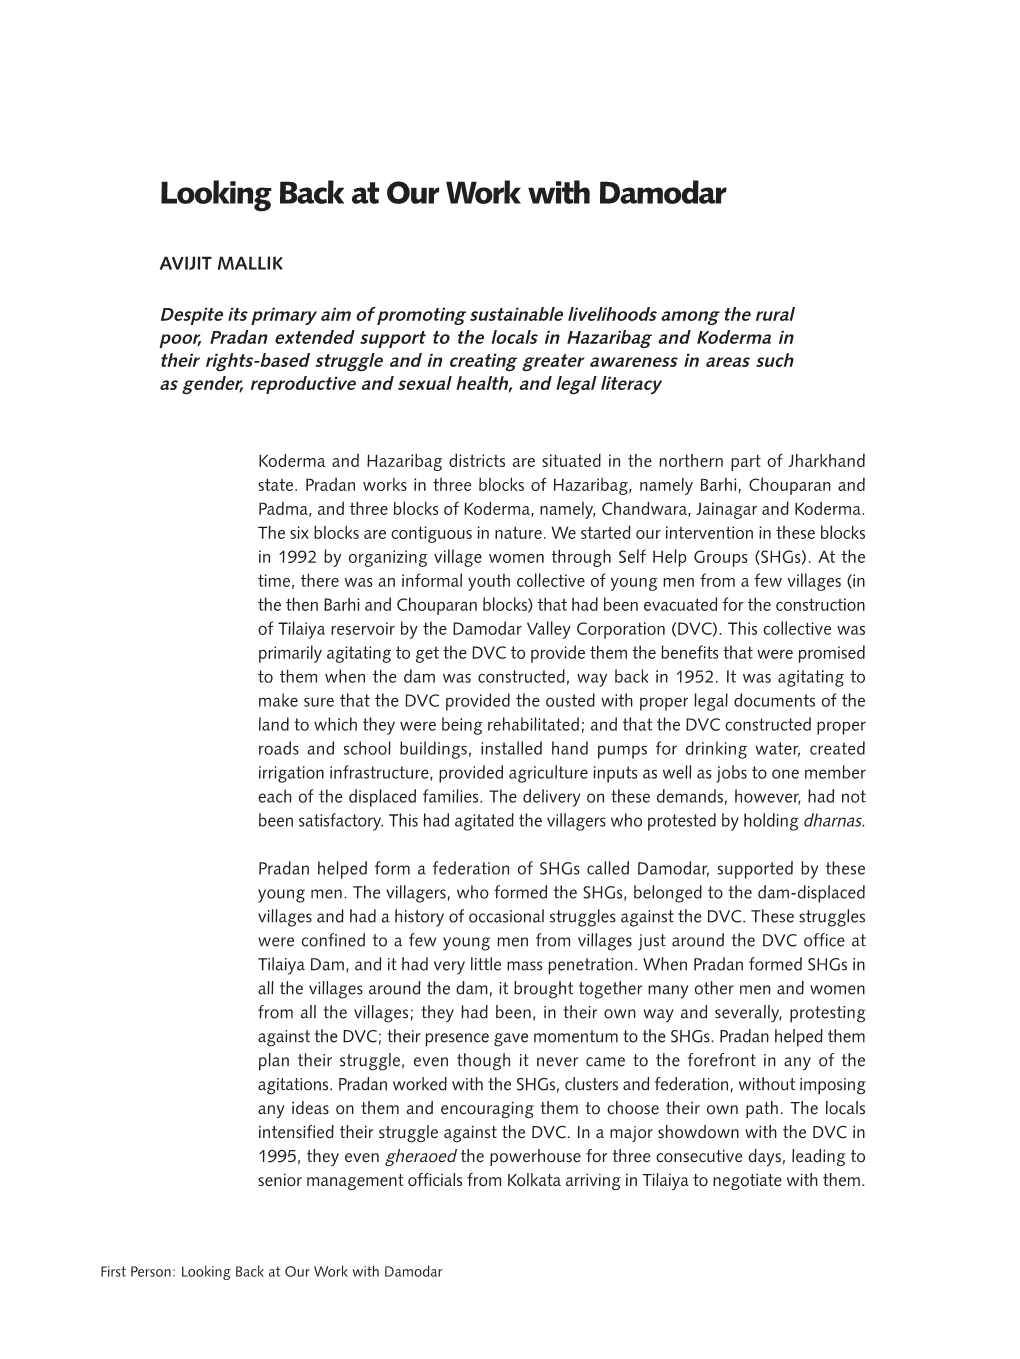 Looking Back at Our Work with Damodar-By Avijit Mallik